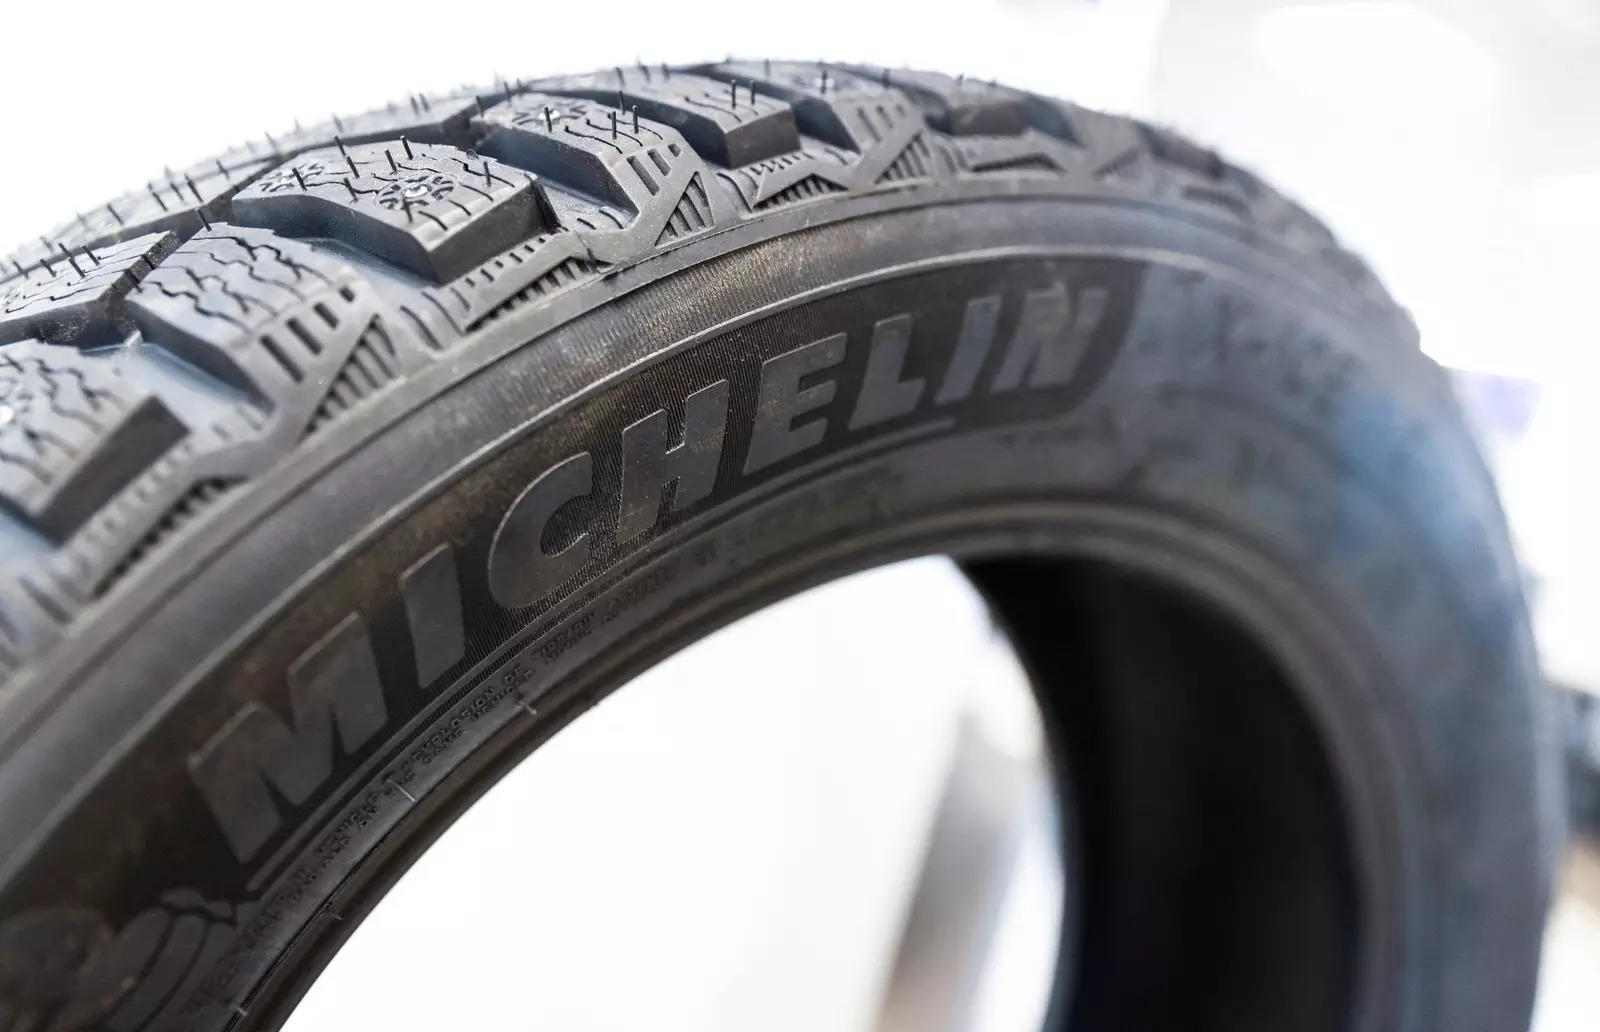 a-tyre-produced-by-the-french-company-michelin-is-on-display-at-a-dealership-in-moscow